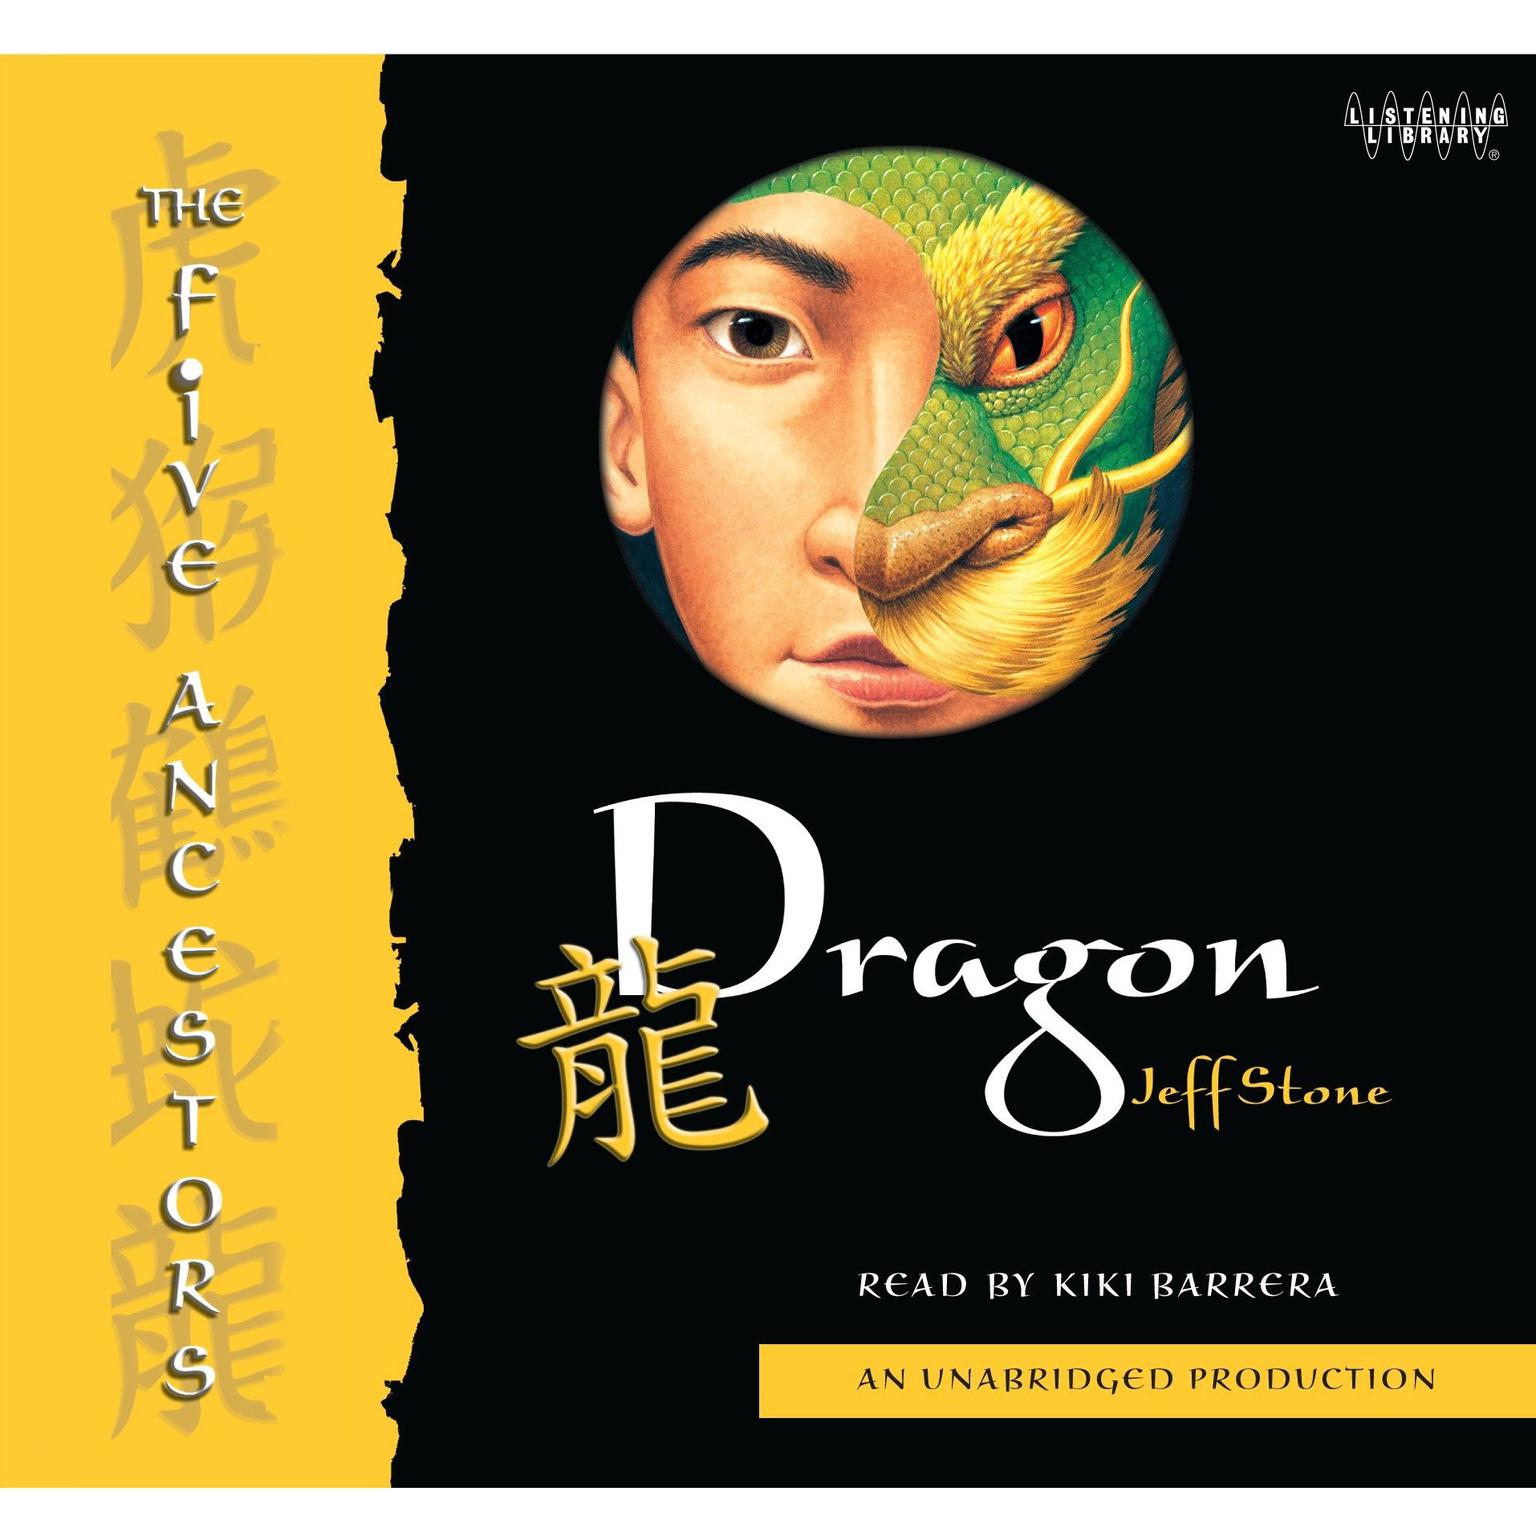 The Five Ancestors Book 7: Dragon Audiobook, by Jeff Stone